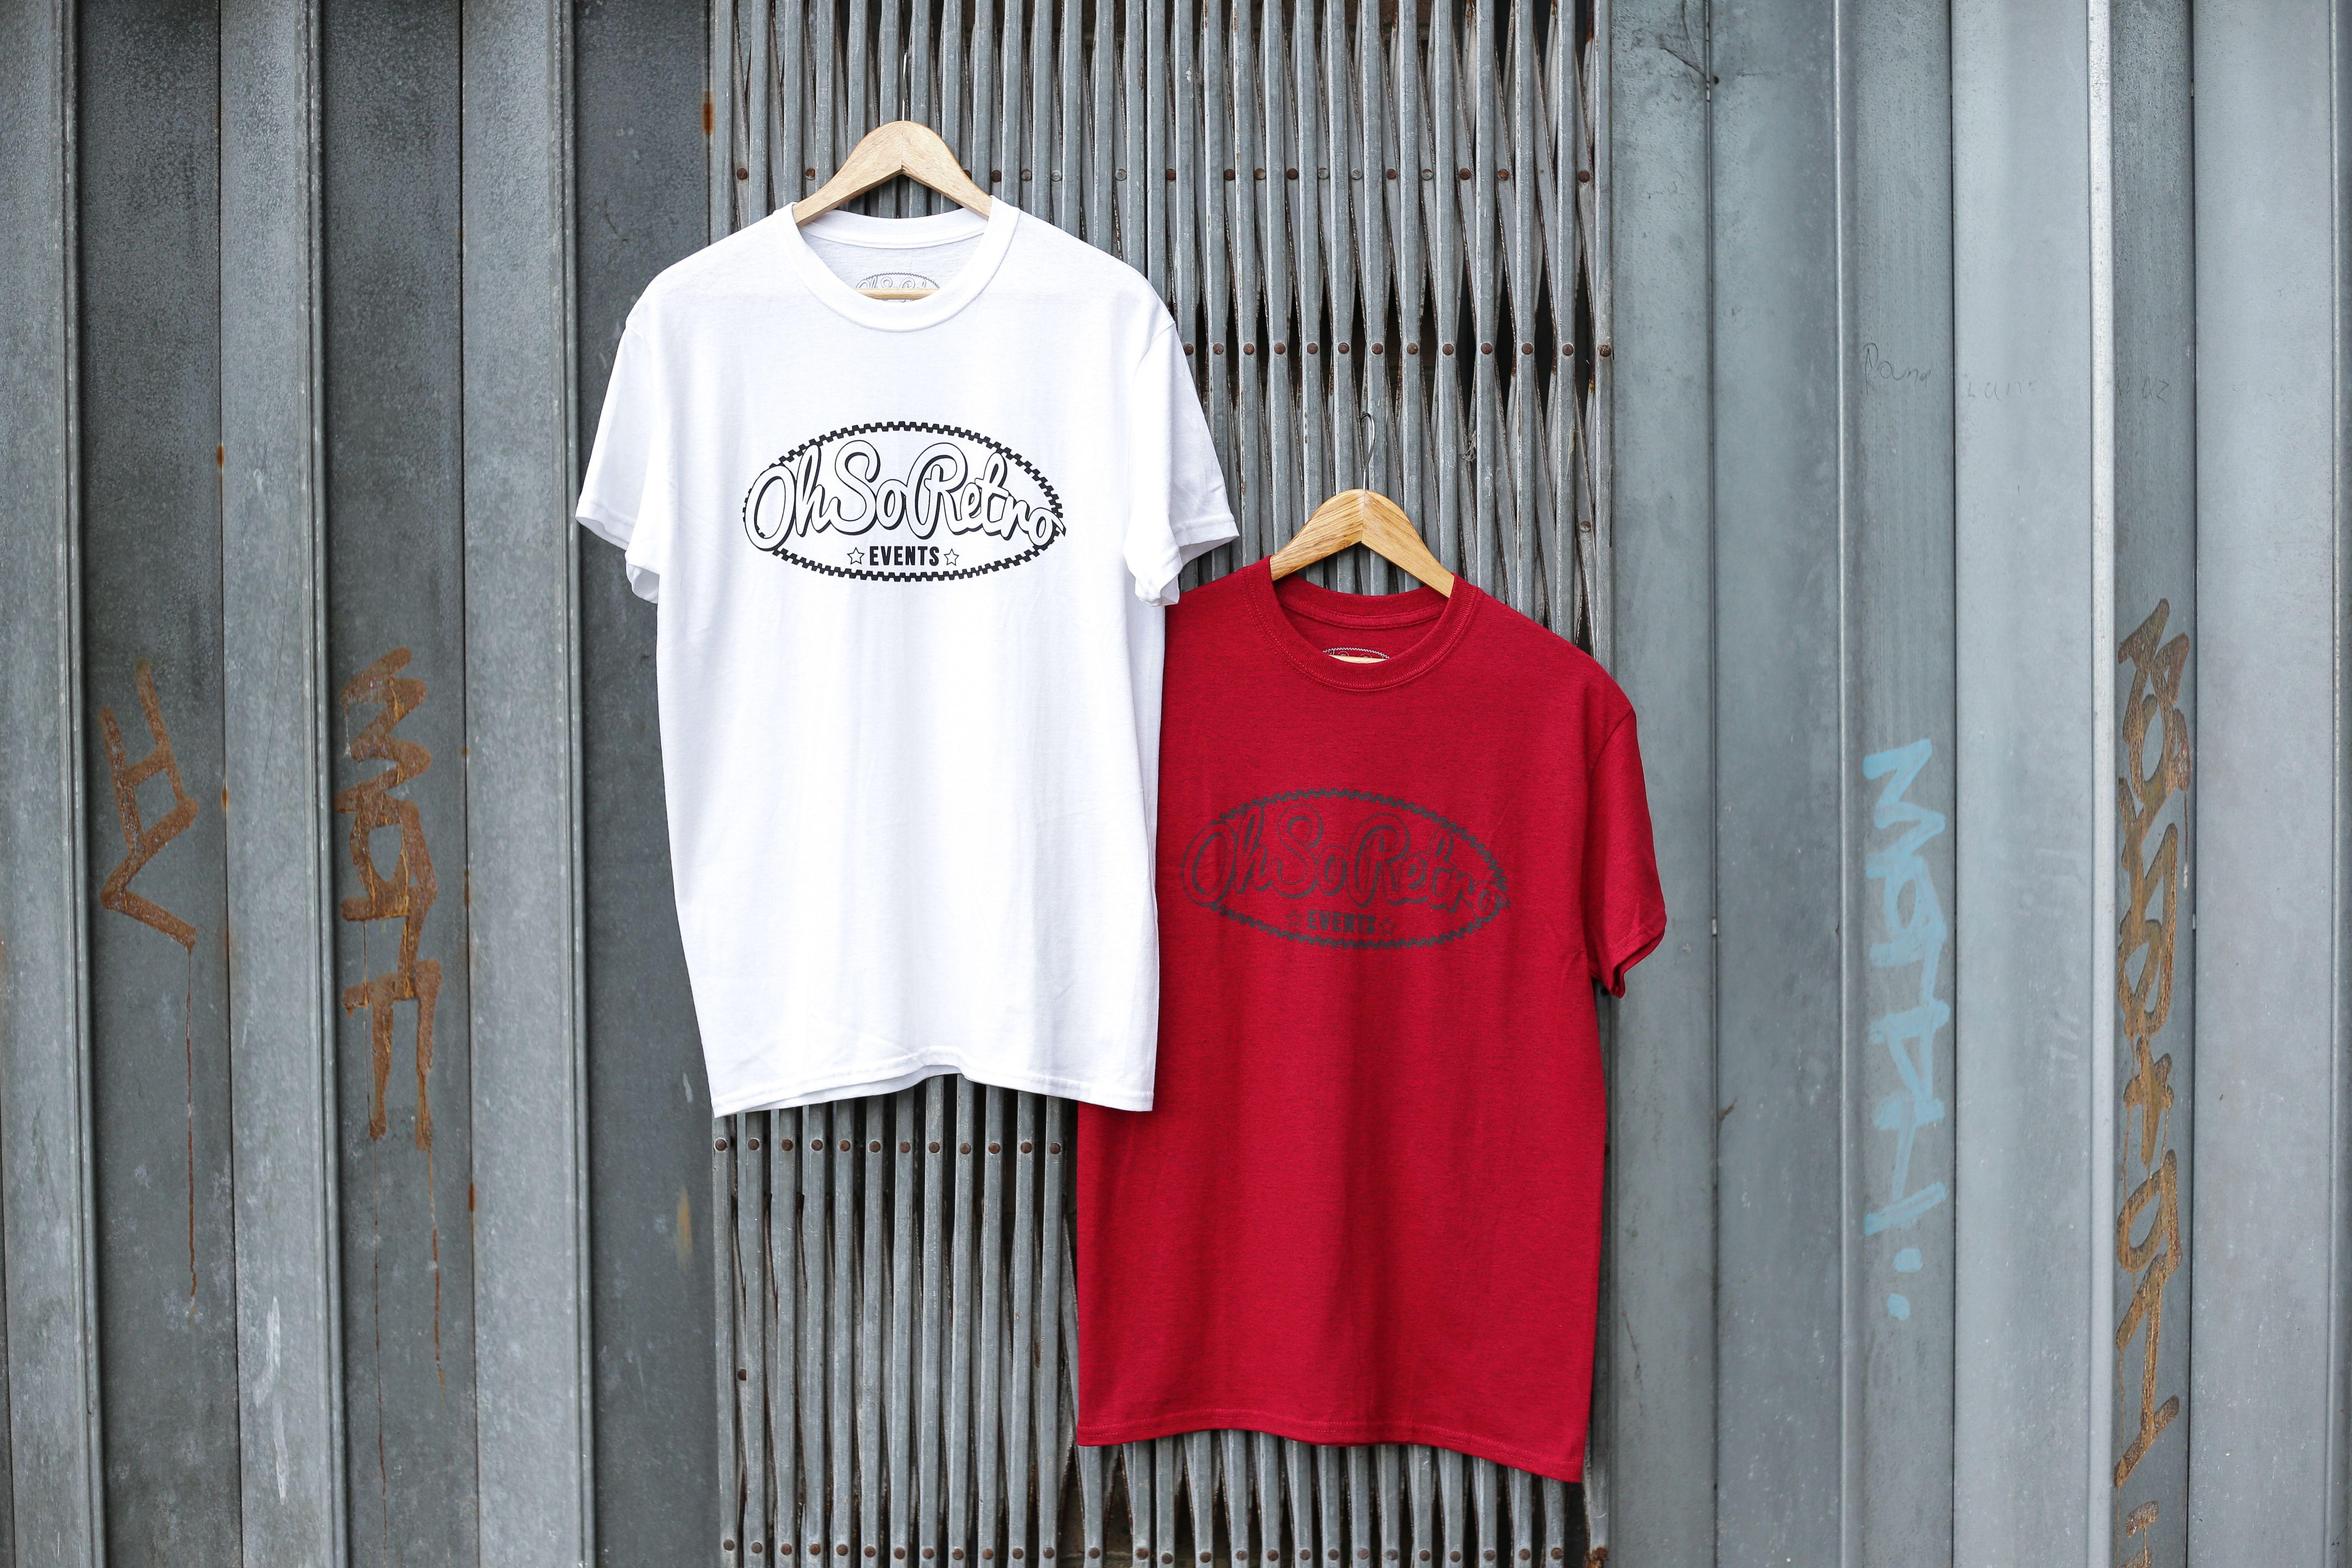 Black and Red Oval Logo - Antique Red with Black Oval Logo Tshirt